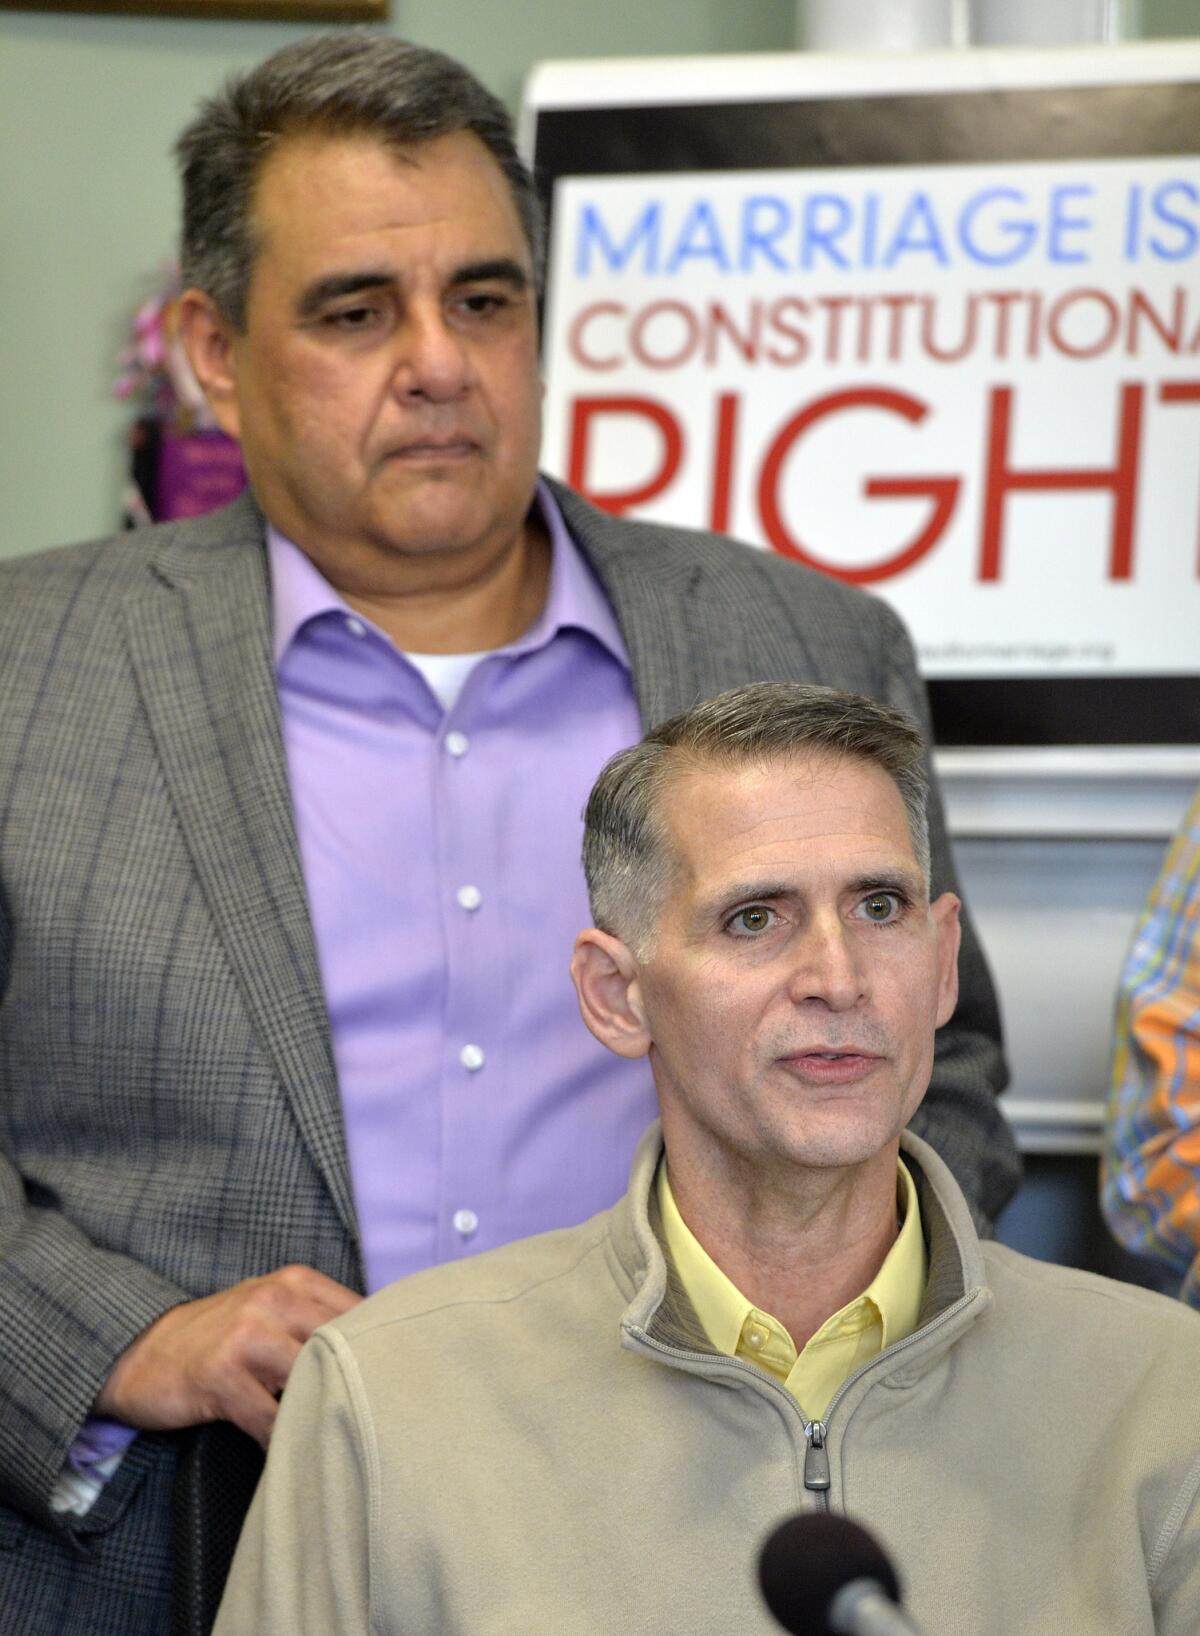 Greg Bourke, front, and his partner Michael Deleon speak to reporters following the ruling by U.S. District Judge John G. Heyburn earlier this month that Kentucky must recognize same-sex marriages performed in other states. On Thursday, Heyburn issued a final order reinforcing his ruling and didn't address a request by the state for a state.